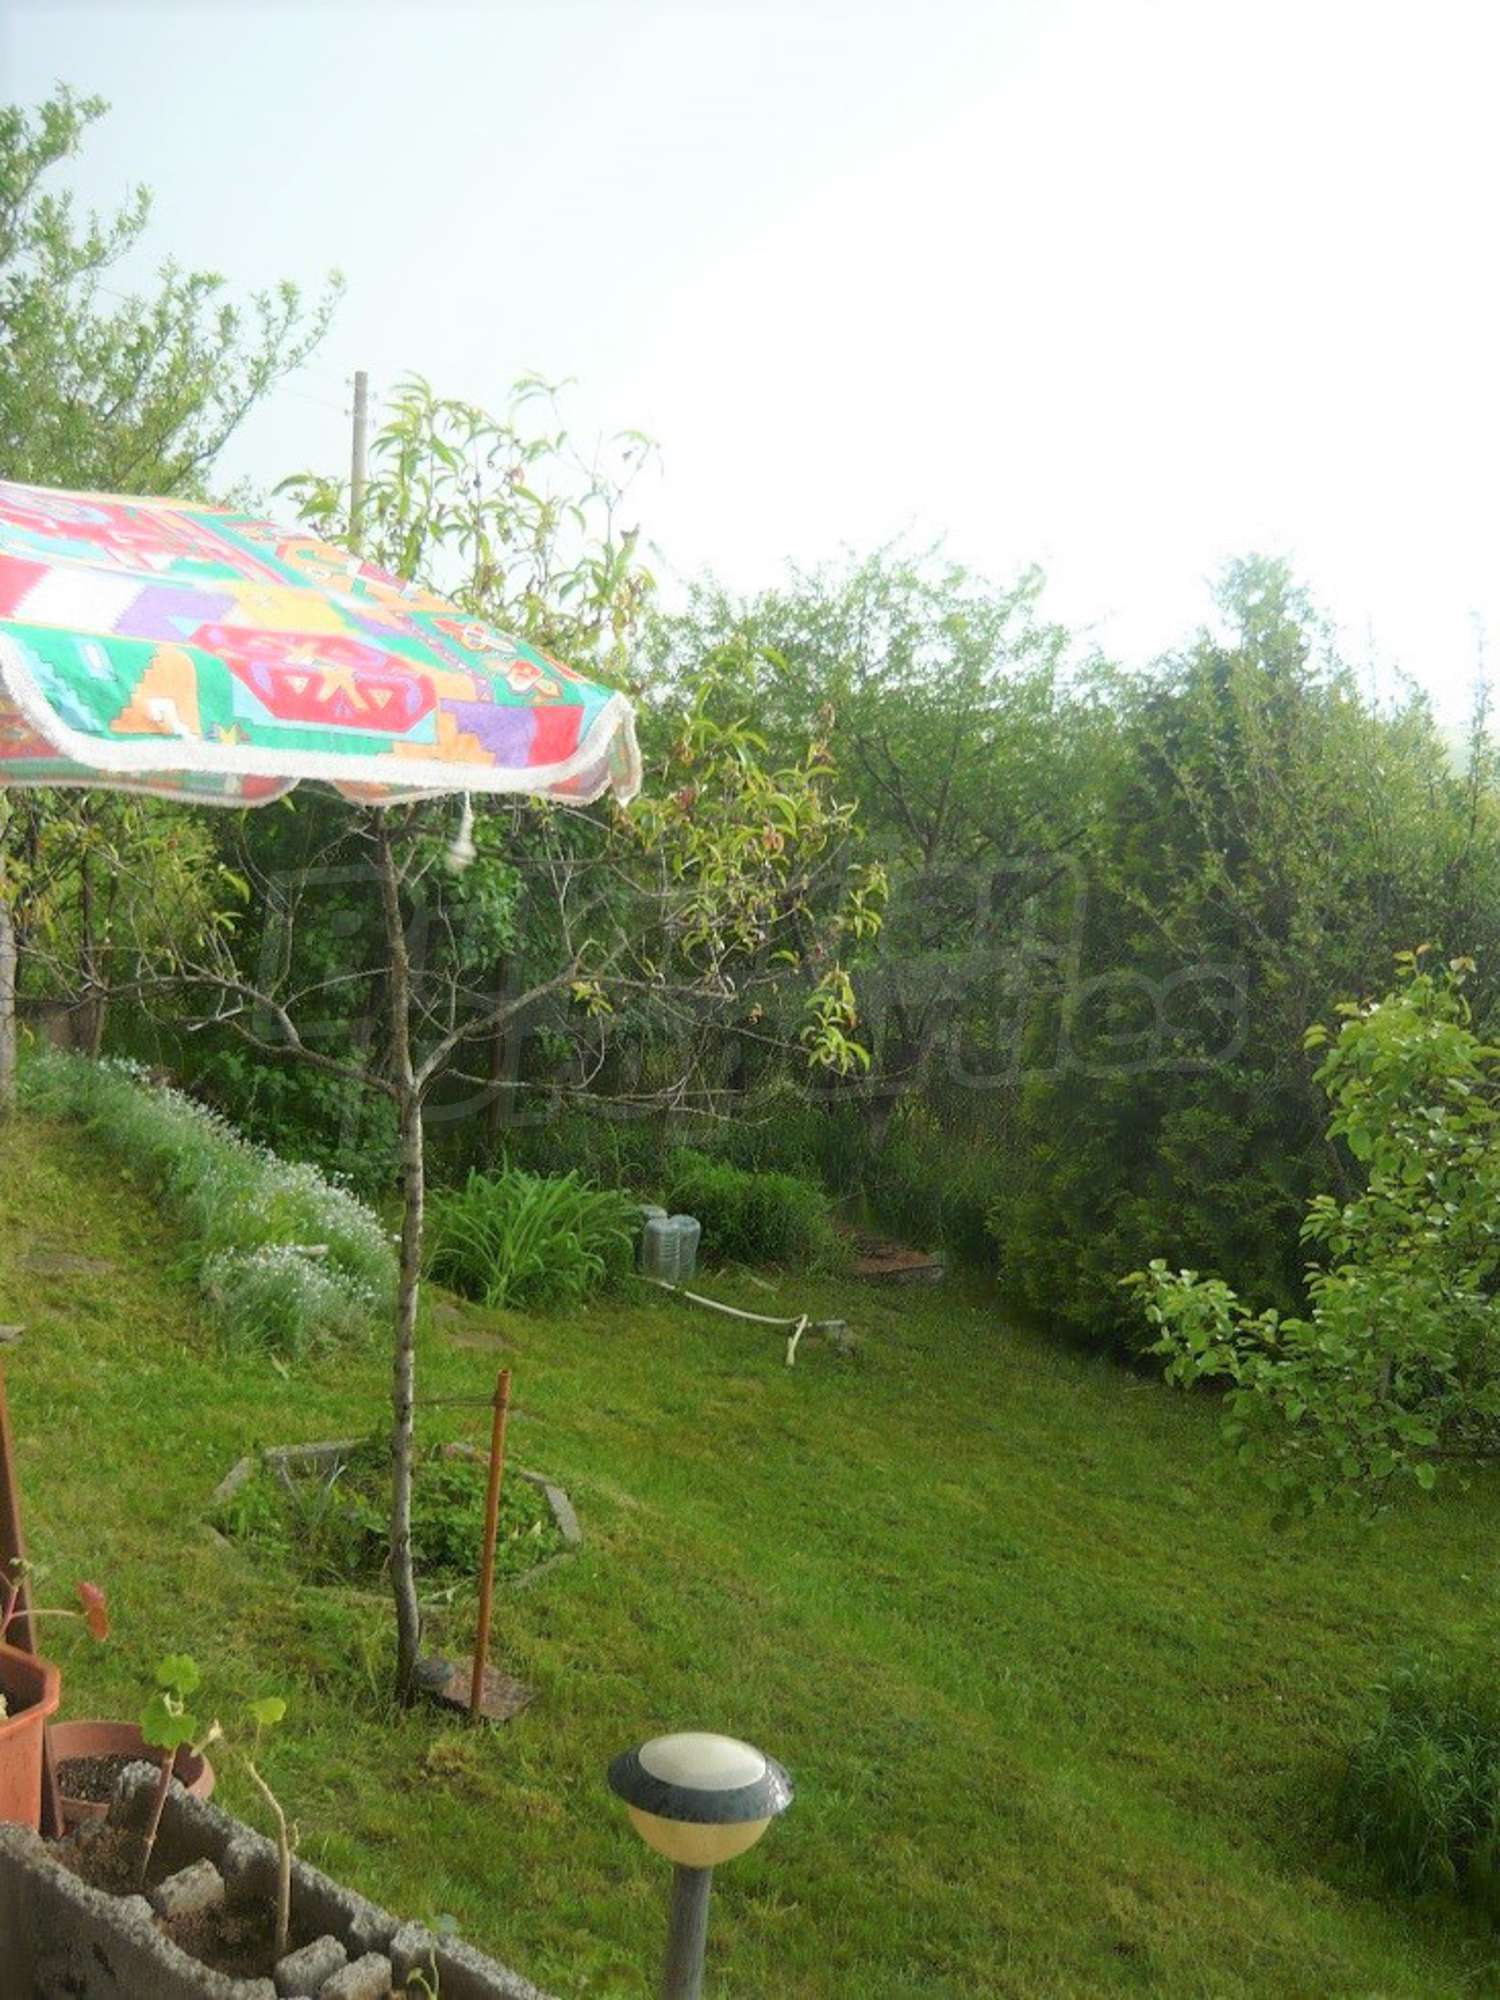 Solid 2-storey house with garden at the foot of the Balkan mountain